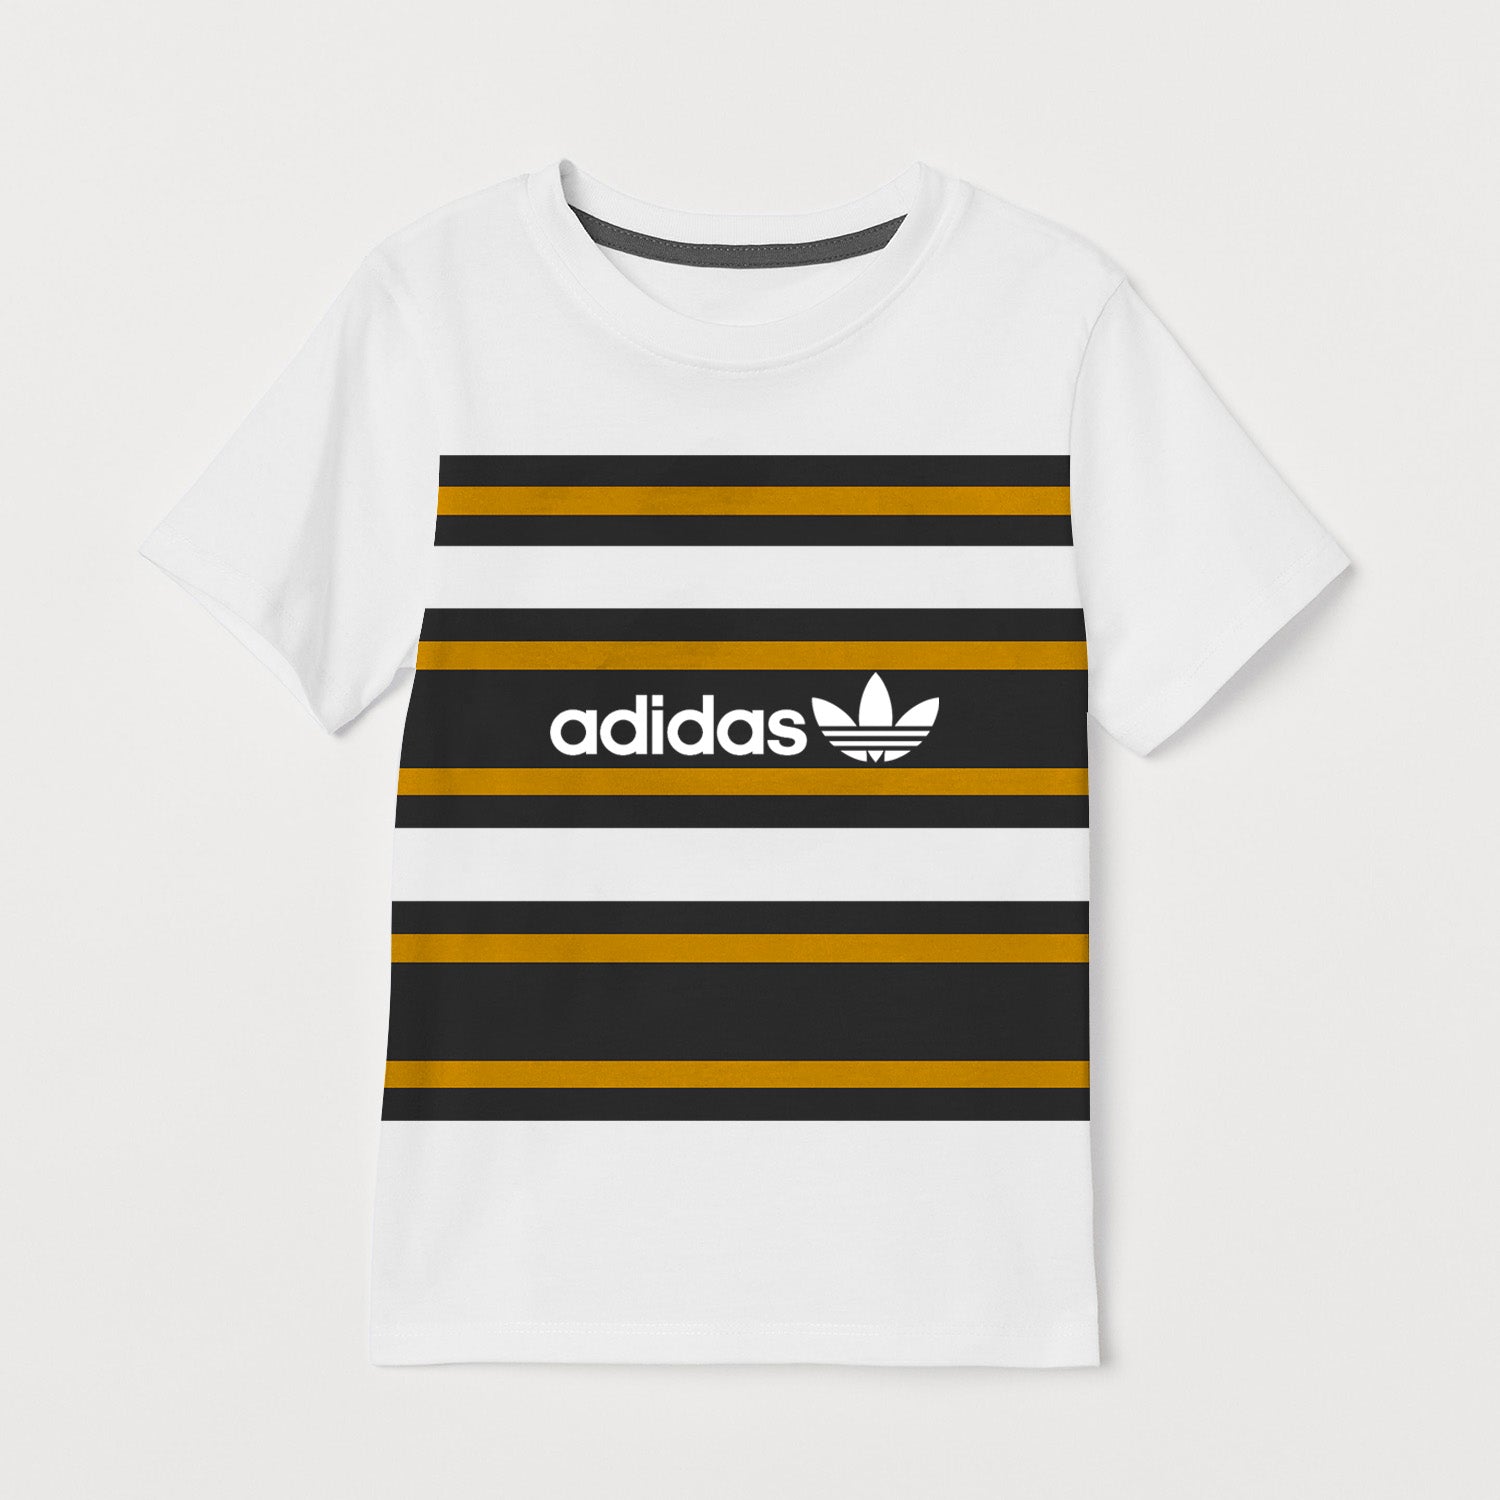 ADS Crew Neck Single Jersey Tee Shirt For Kids-White with Yellow & Dark Navy Panels-BE12037